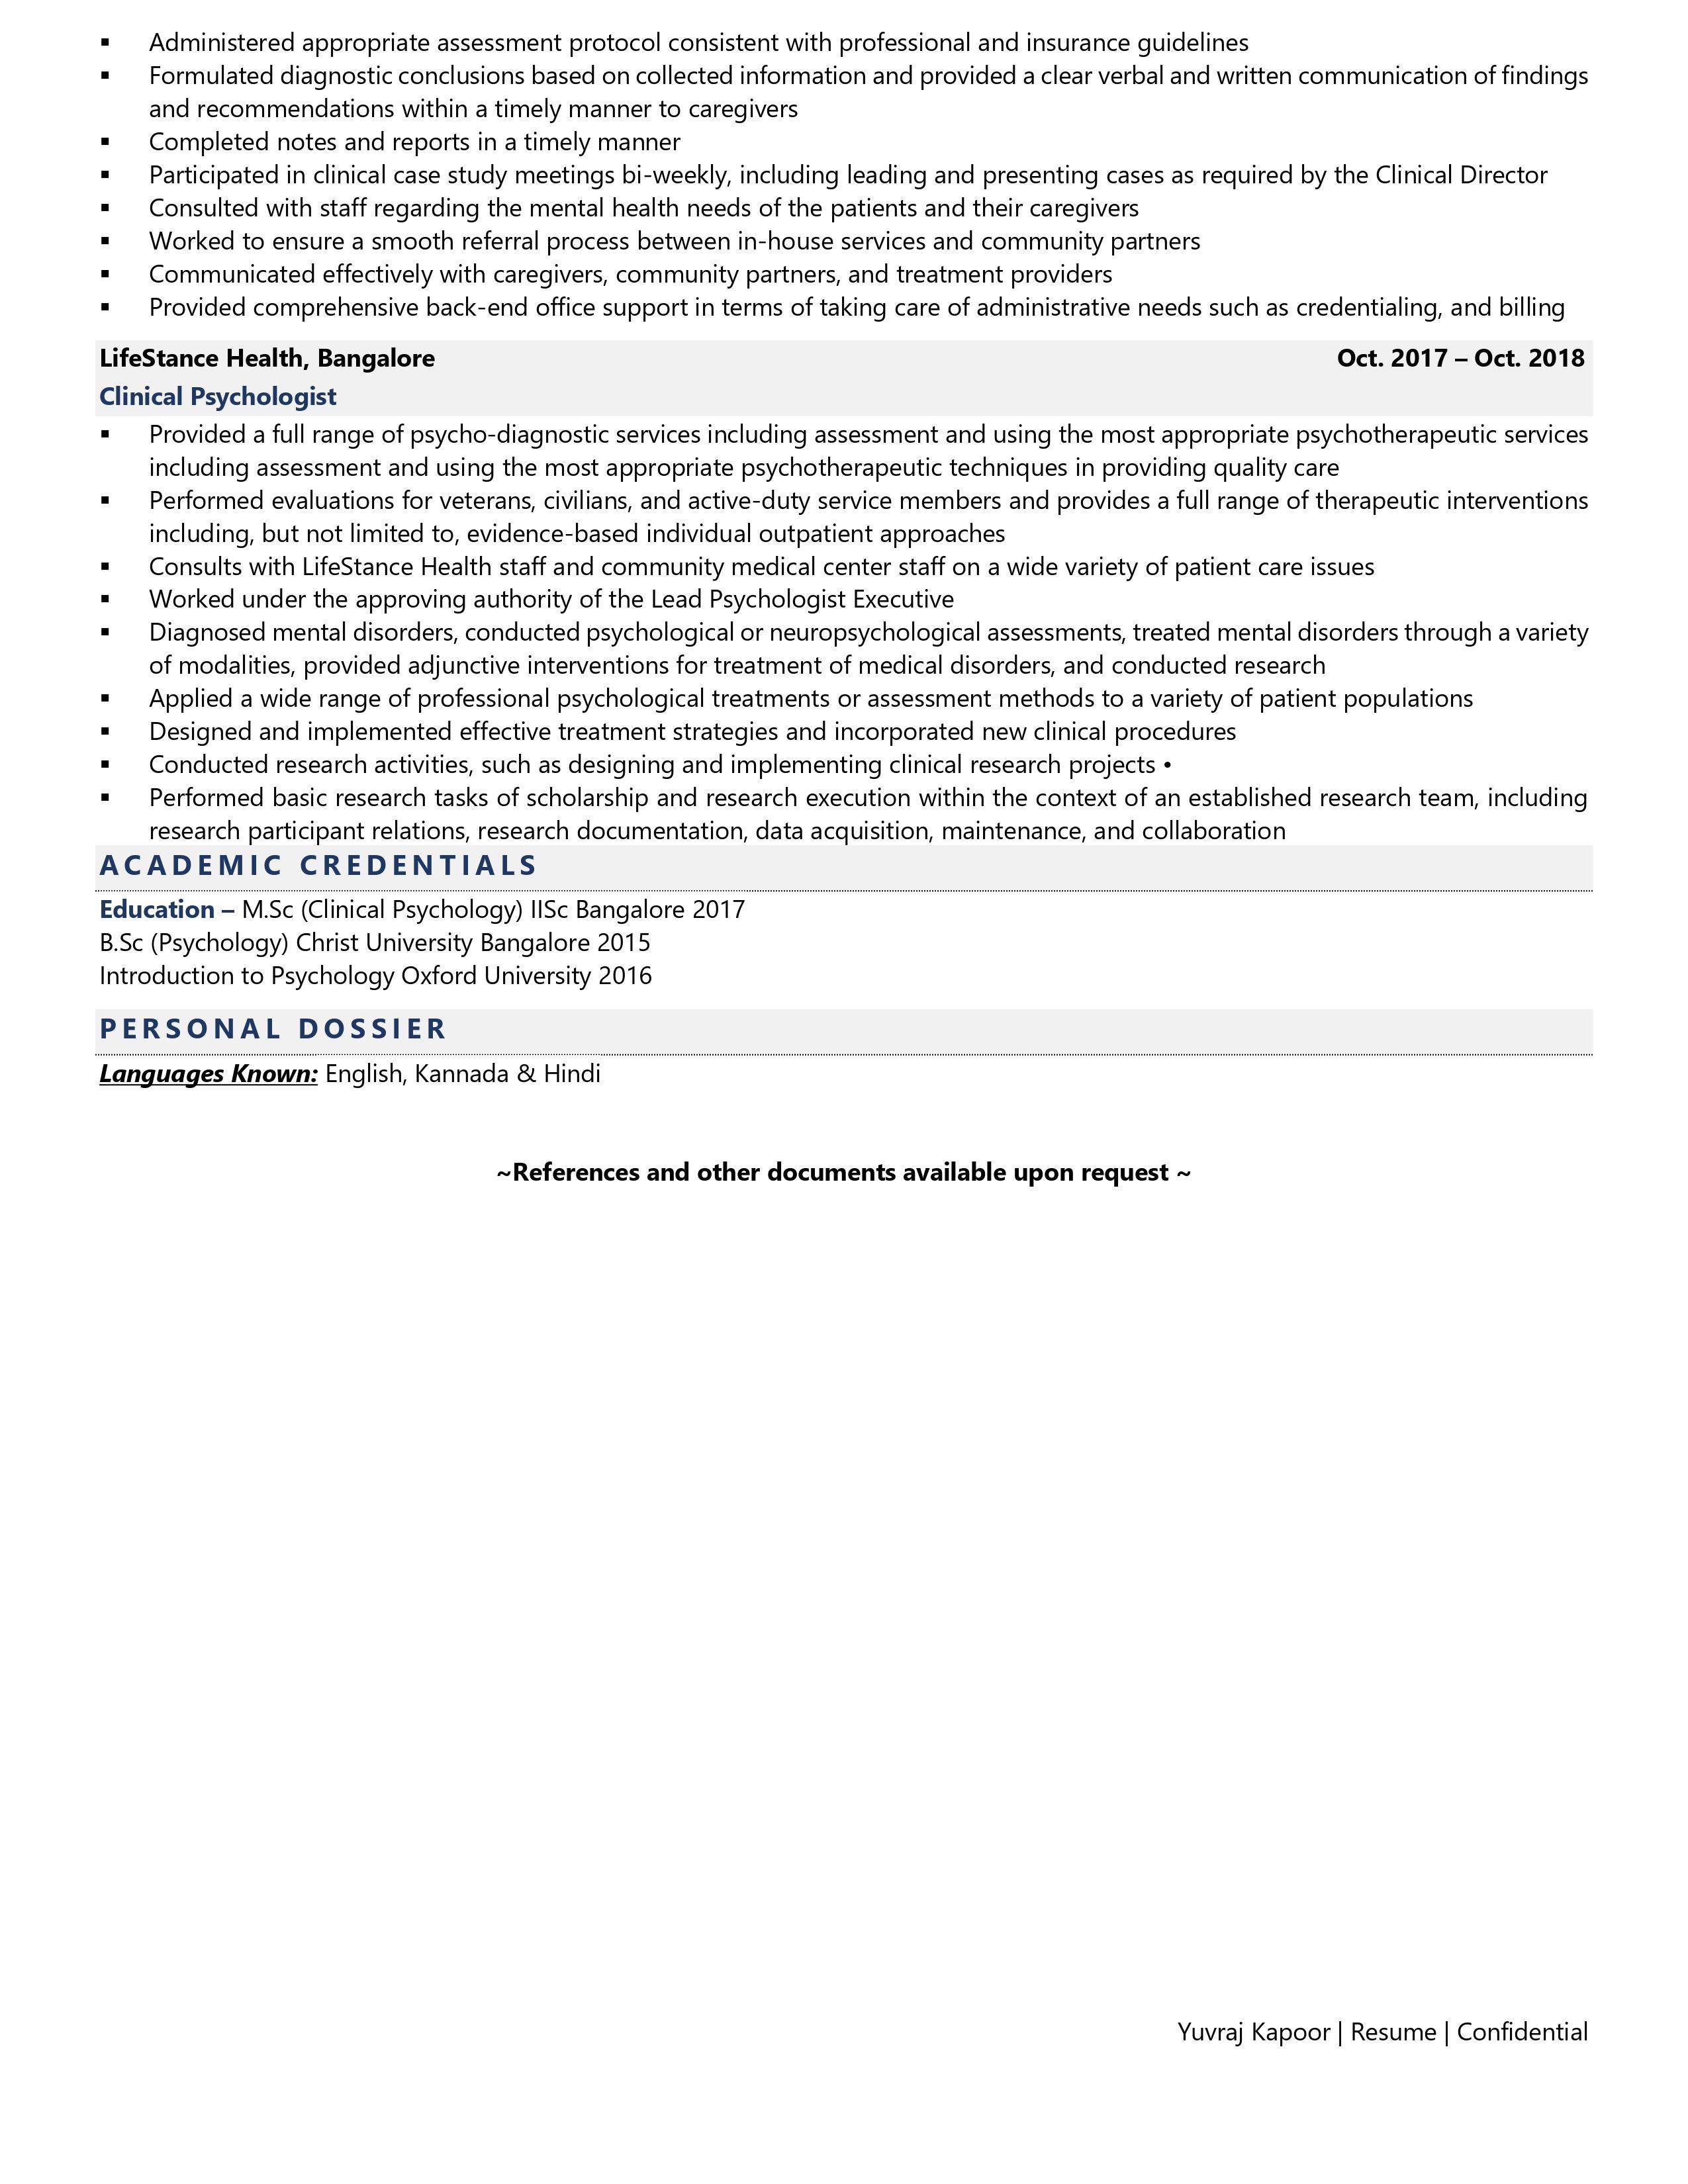 Psychologist - Resume Example & Template